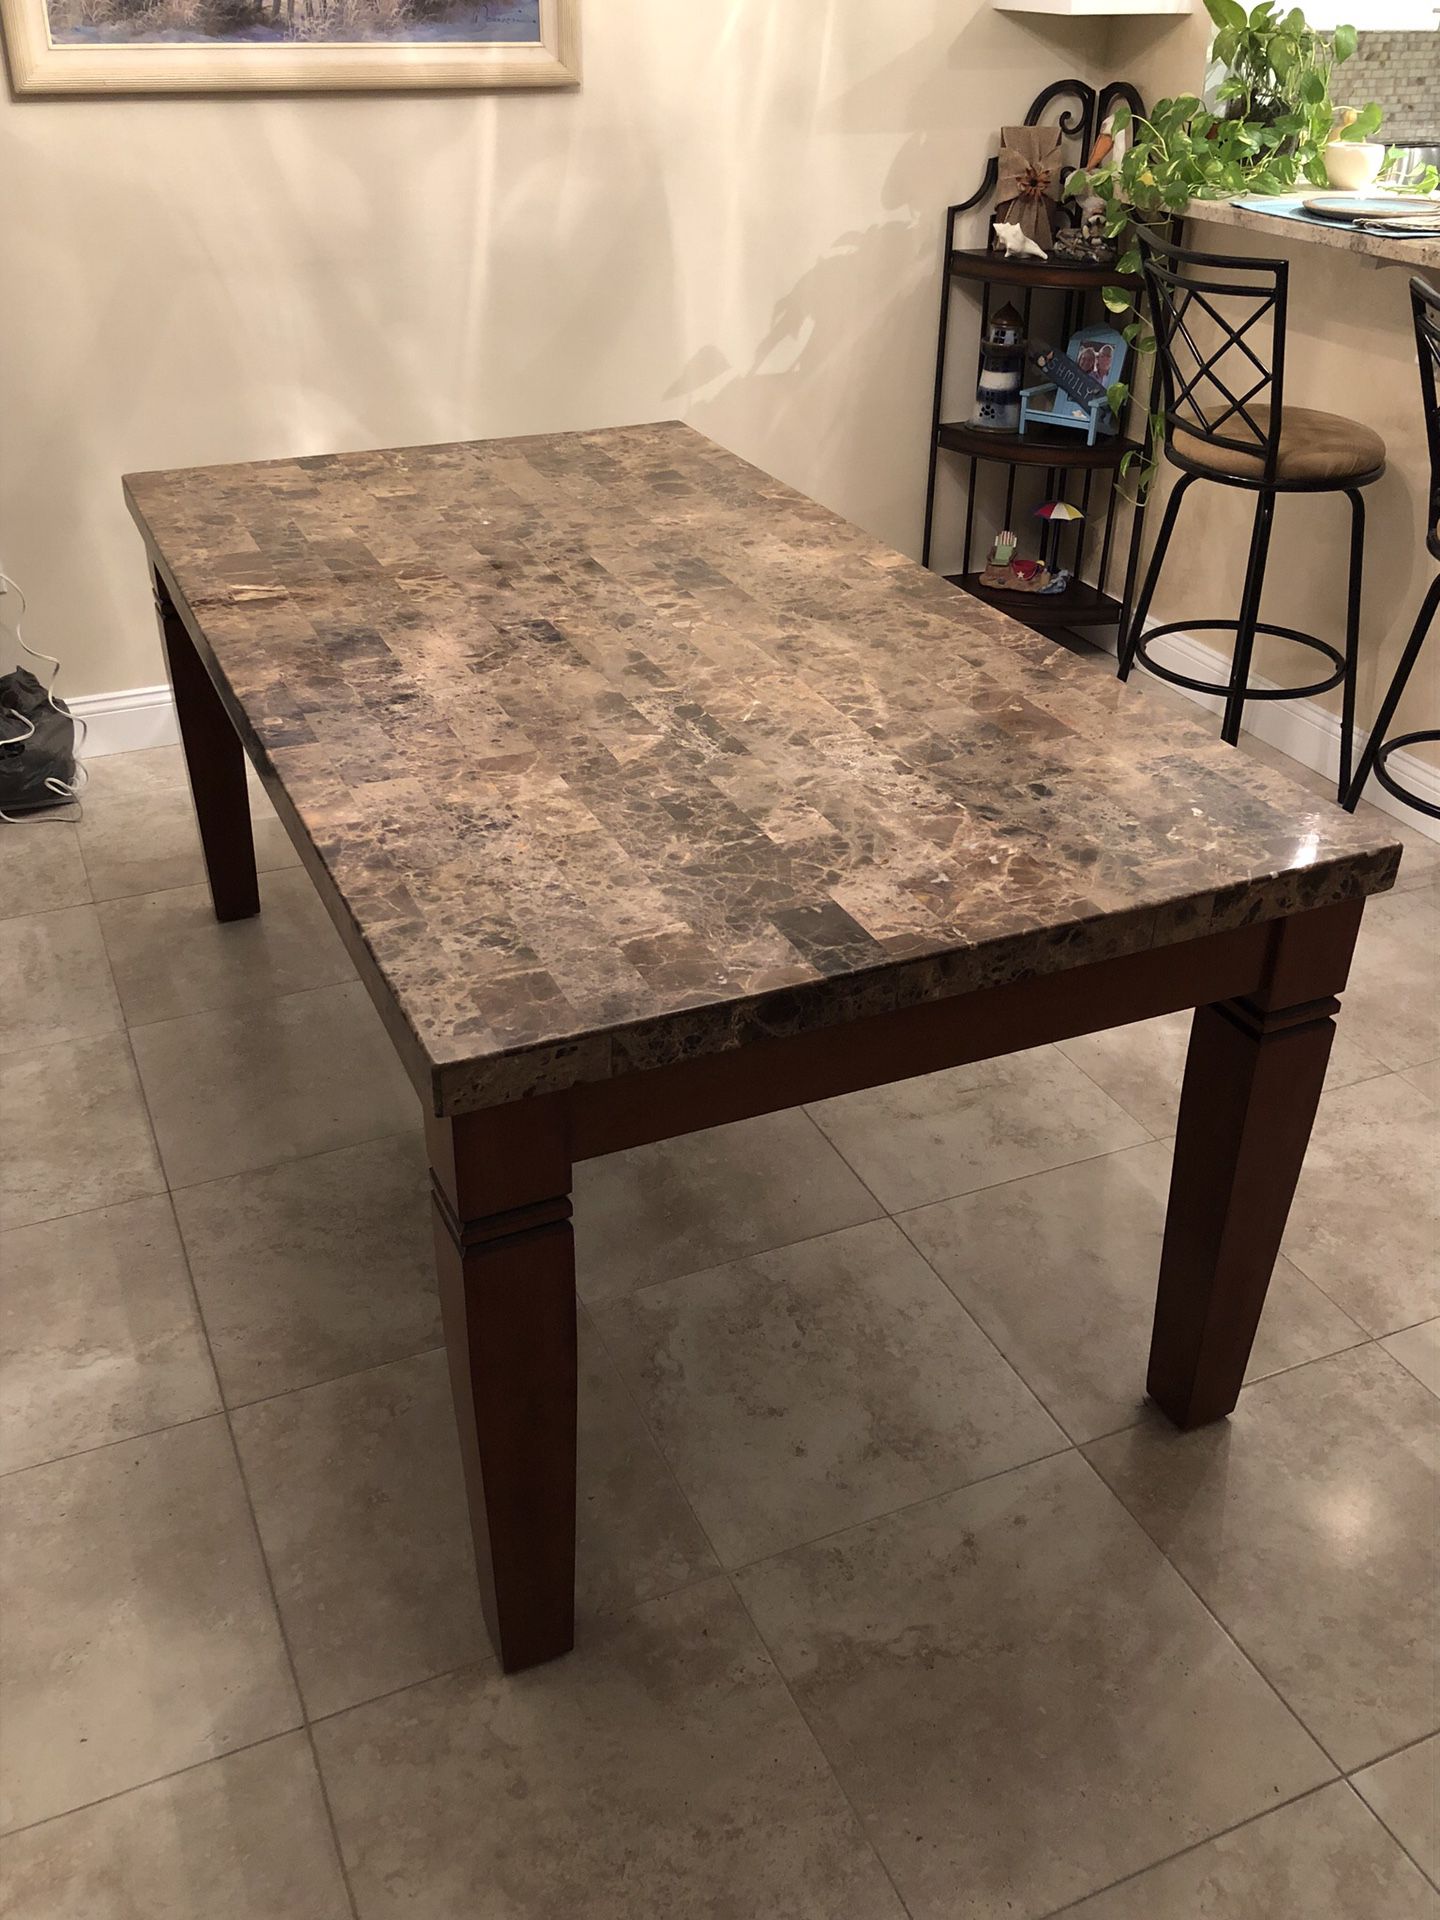 One piece solid dinning room table!